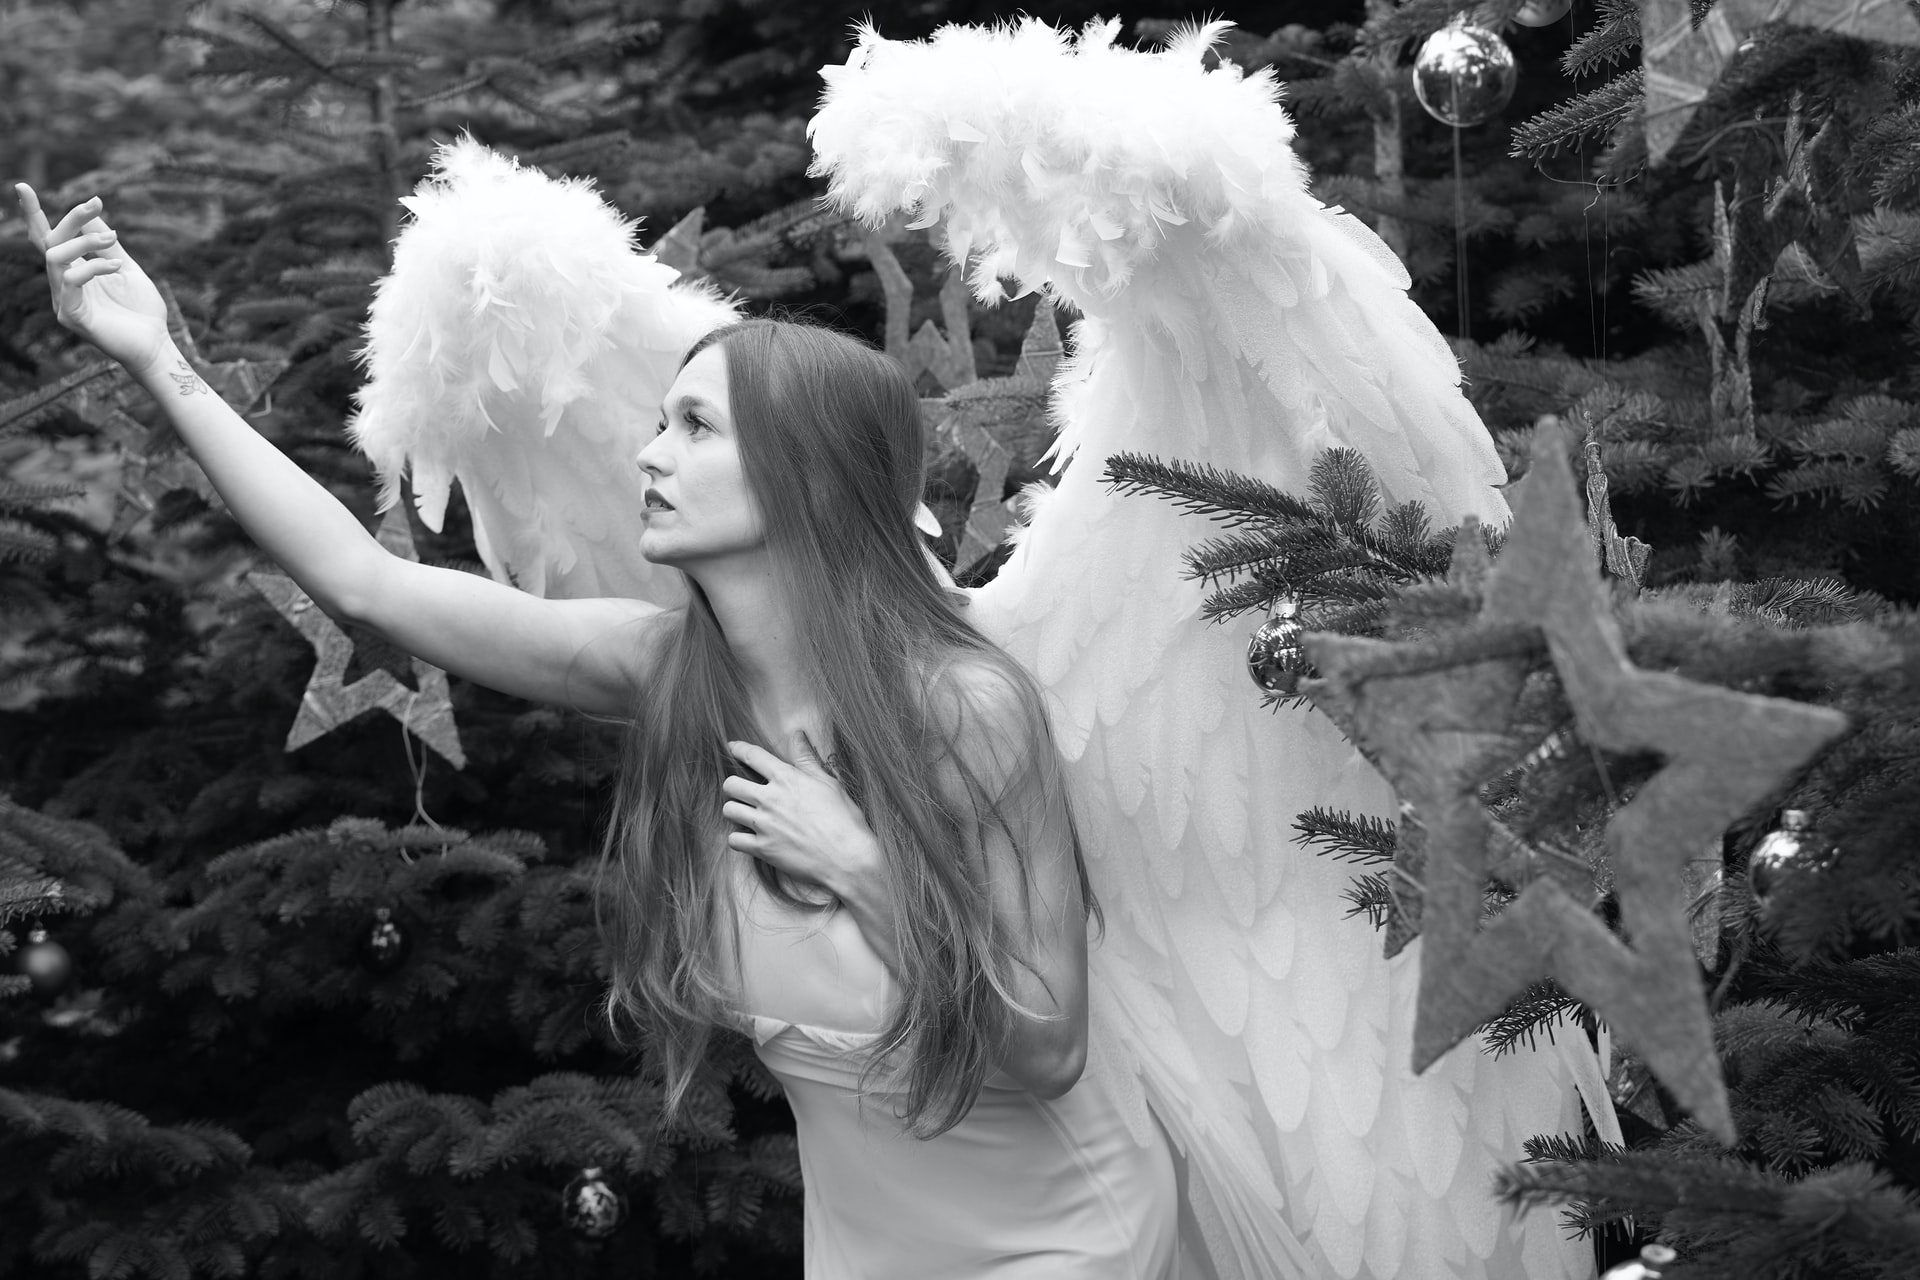 A Girl With White Angelic Wings